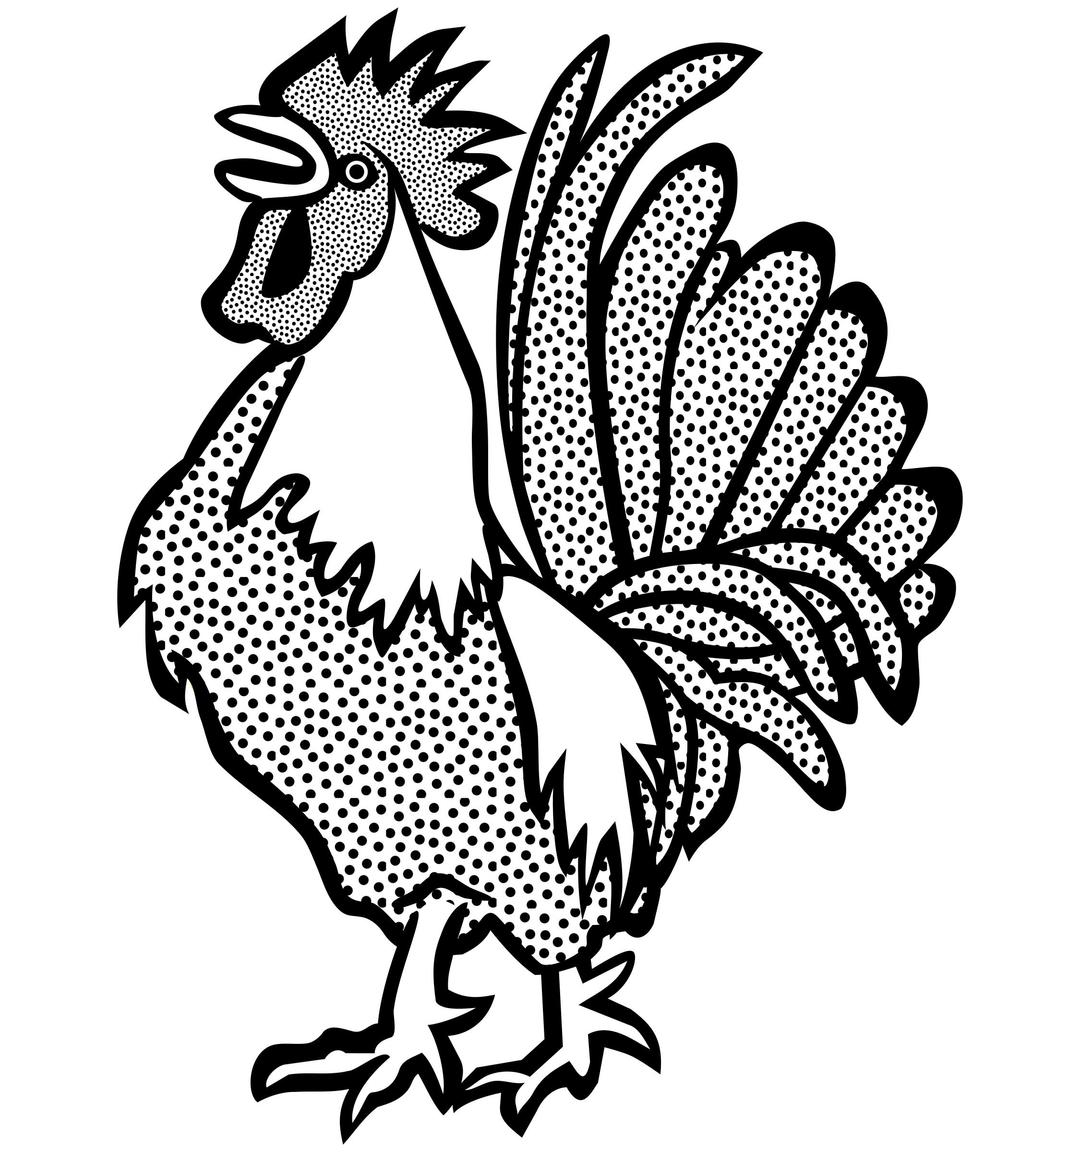 cock2 - lineart png transparent